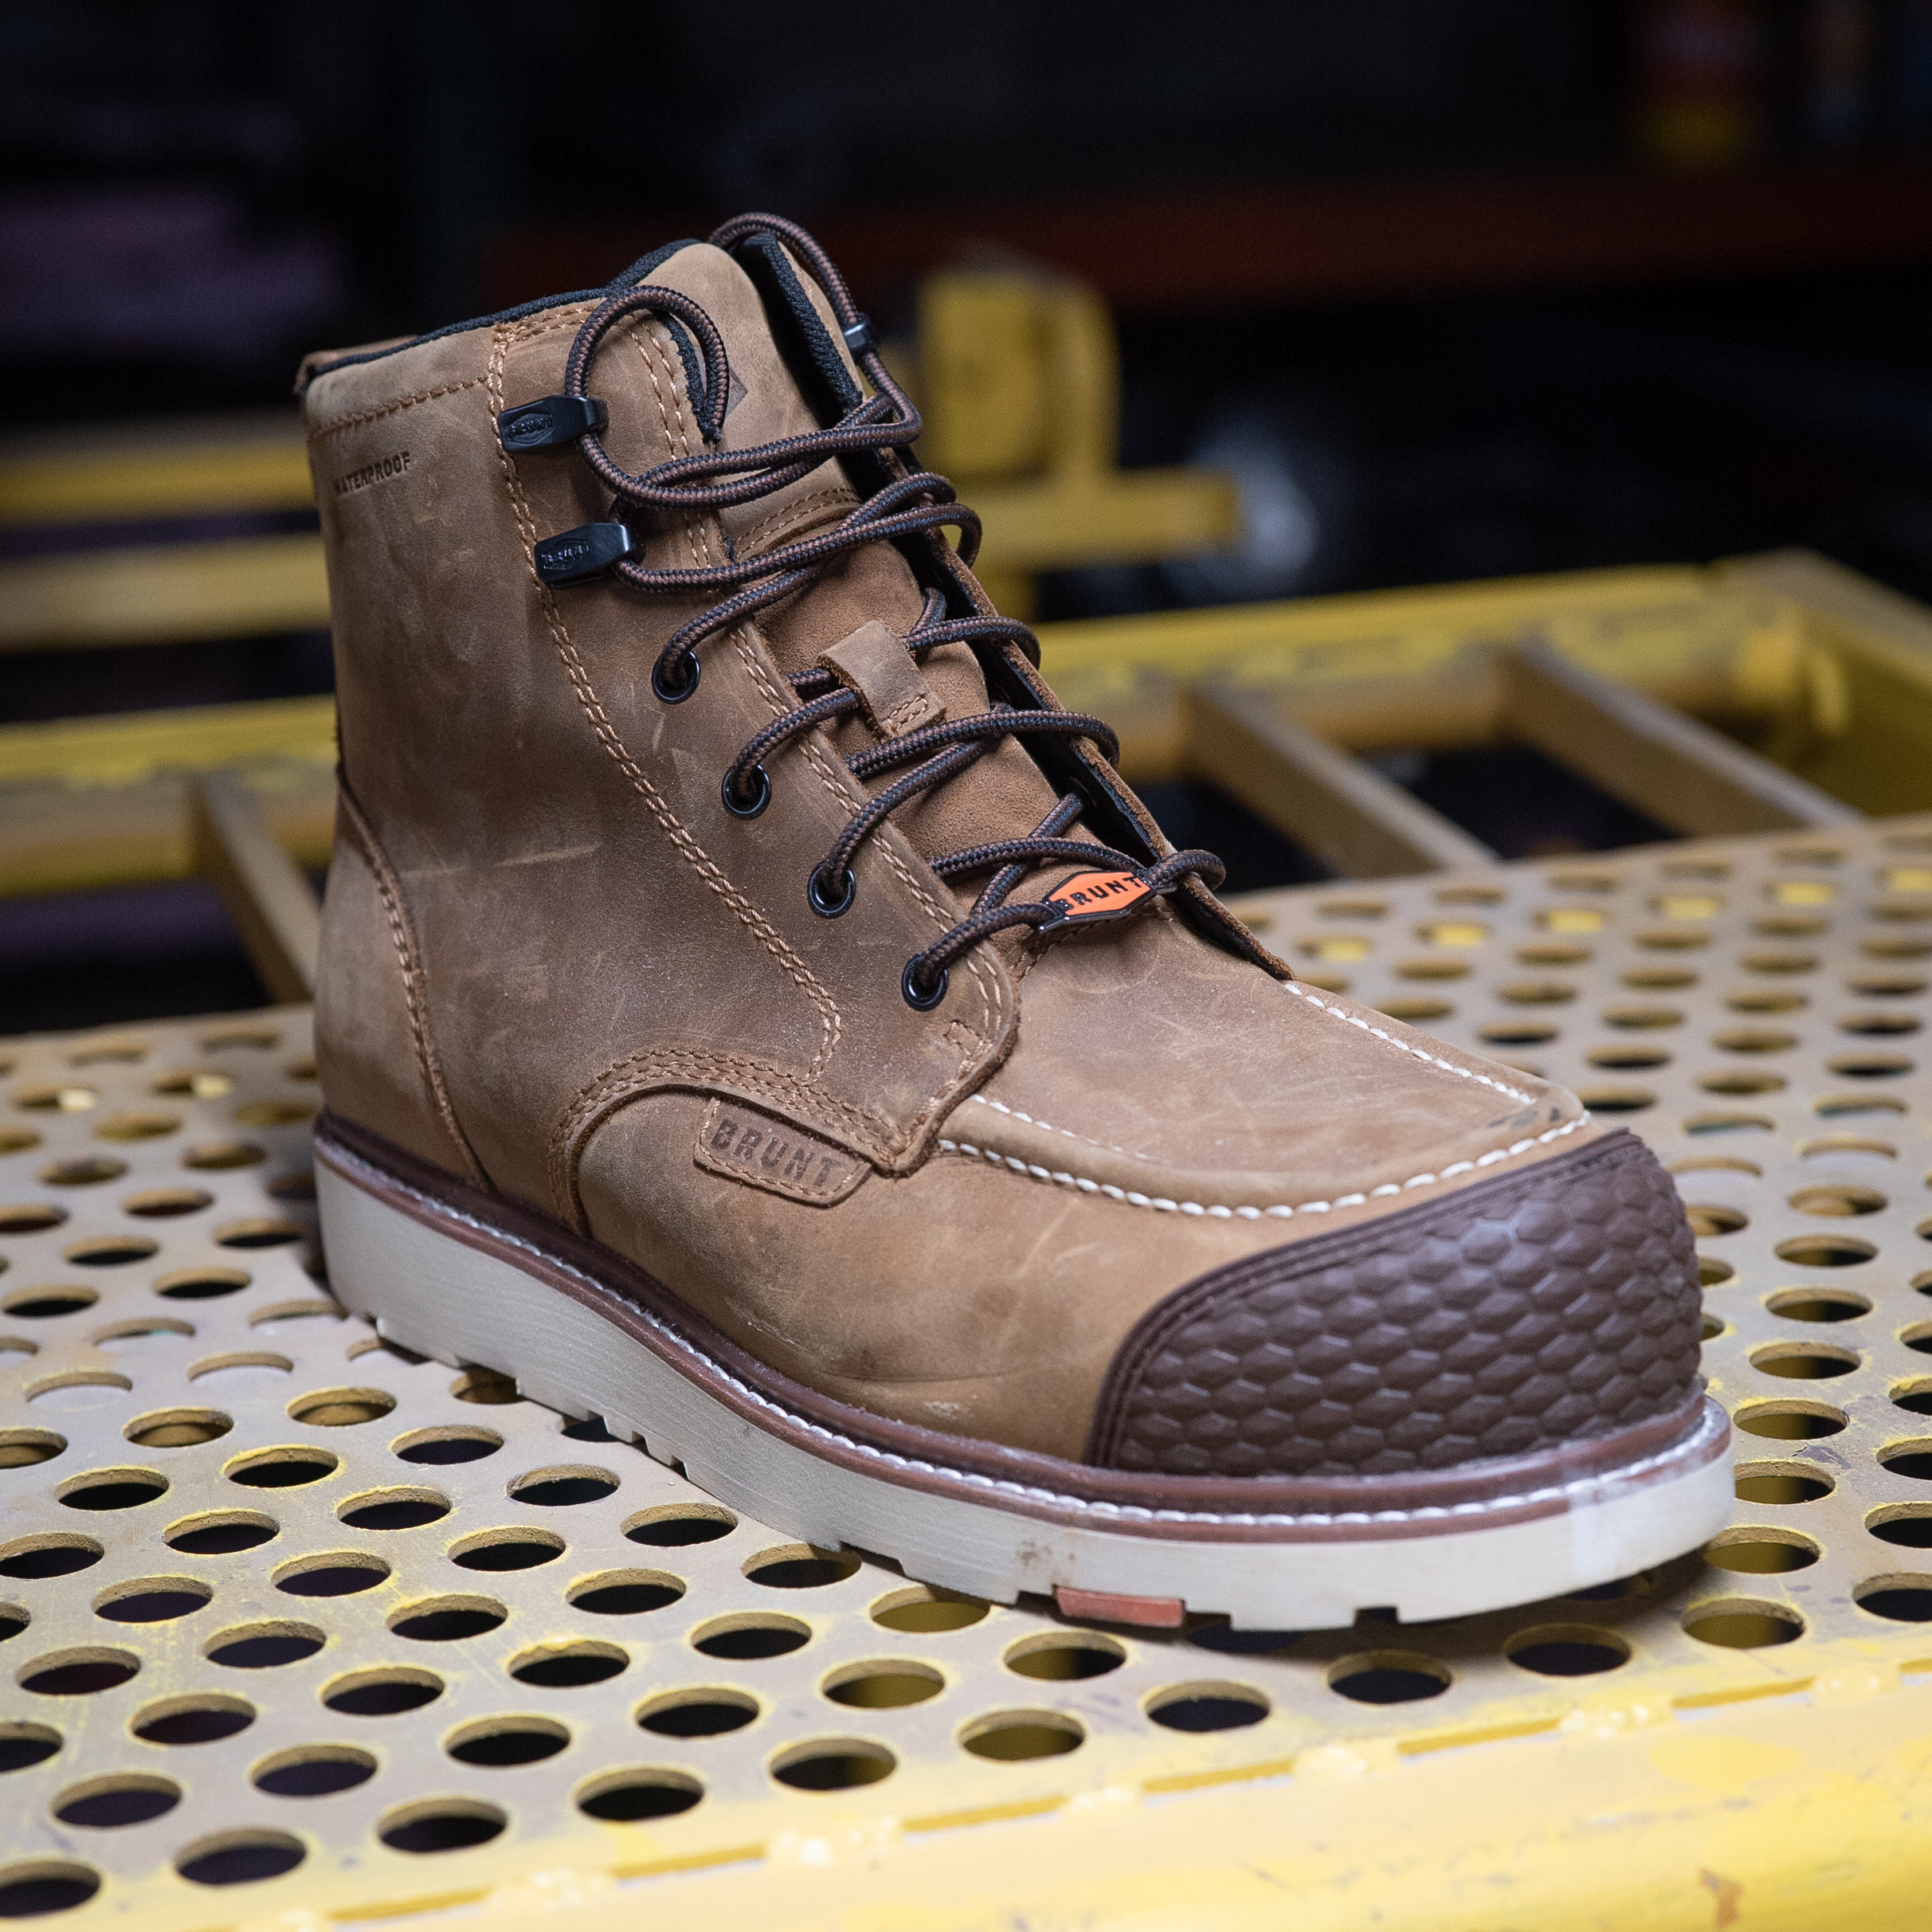 BRUNT Just Upgraded Their Top-Selling Work Boots – 4 Reasons To Buy Them ASAP (If You Haven’t Already)